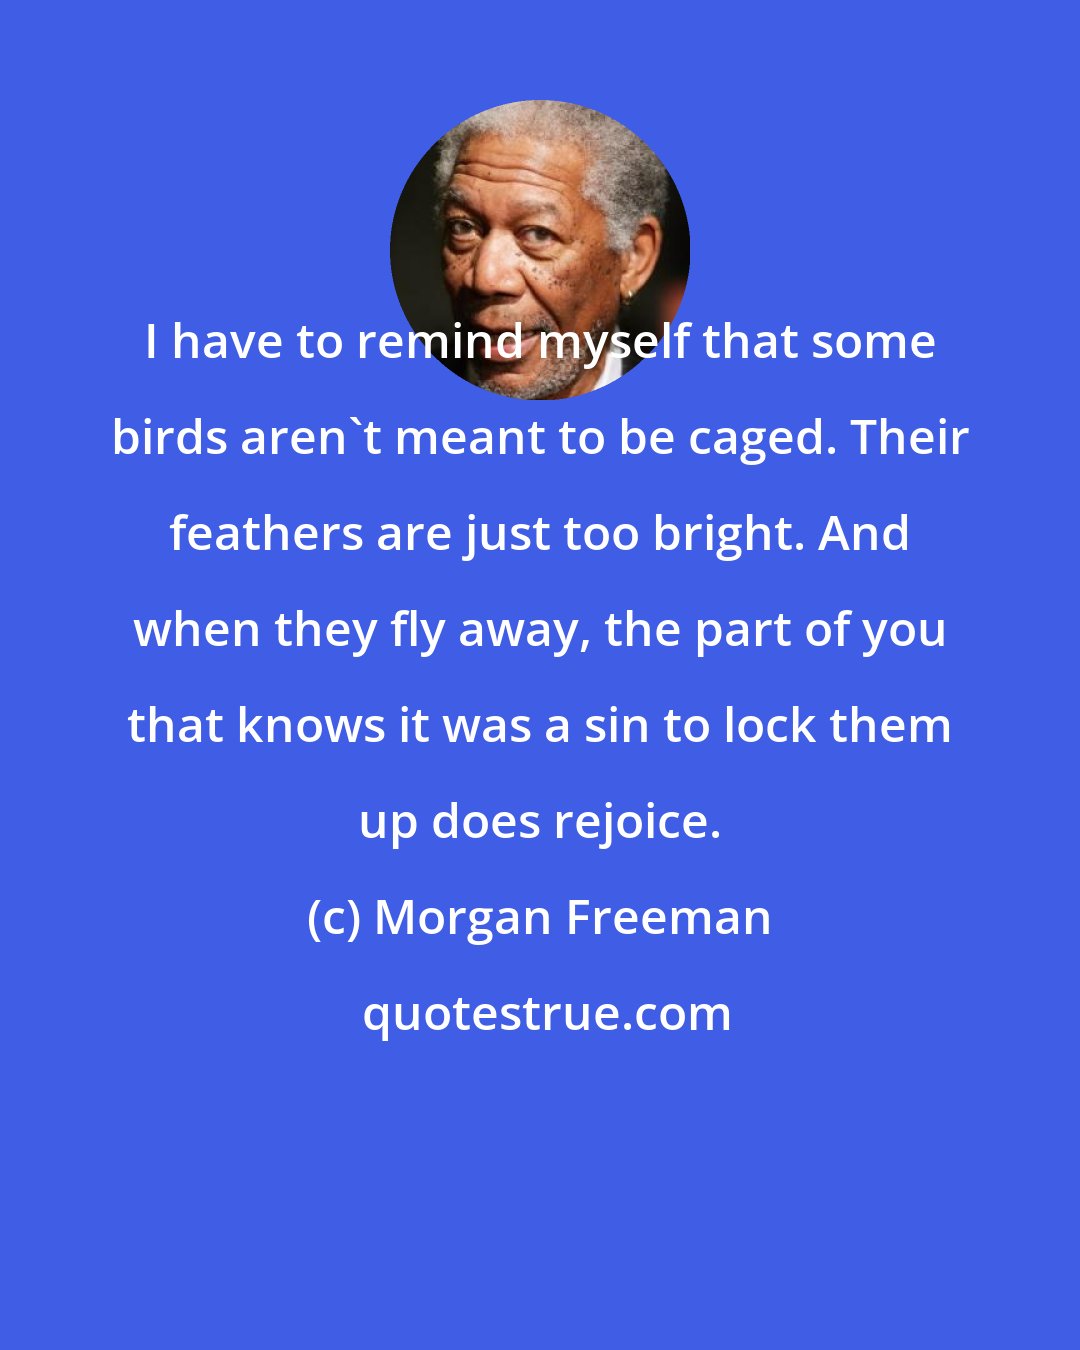 Morgan Freeman: I have to remind myself that some birds aren't meant to be caged. Their feathers are just too bright. And when they fly away, the part of you that knows it was a sin to lock them up does rejoice.